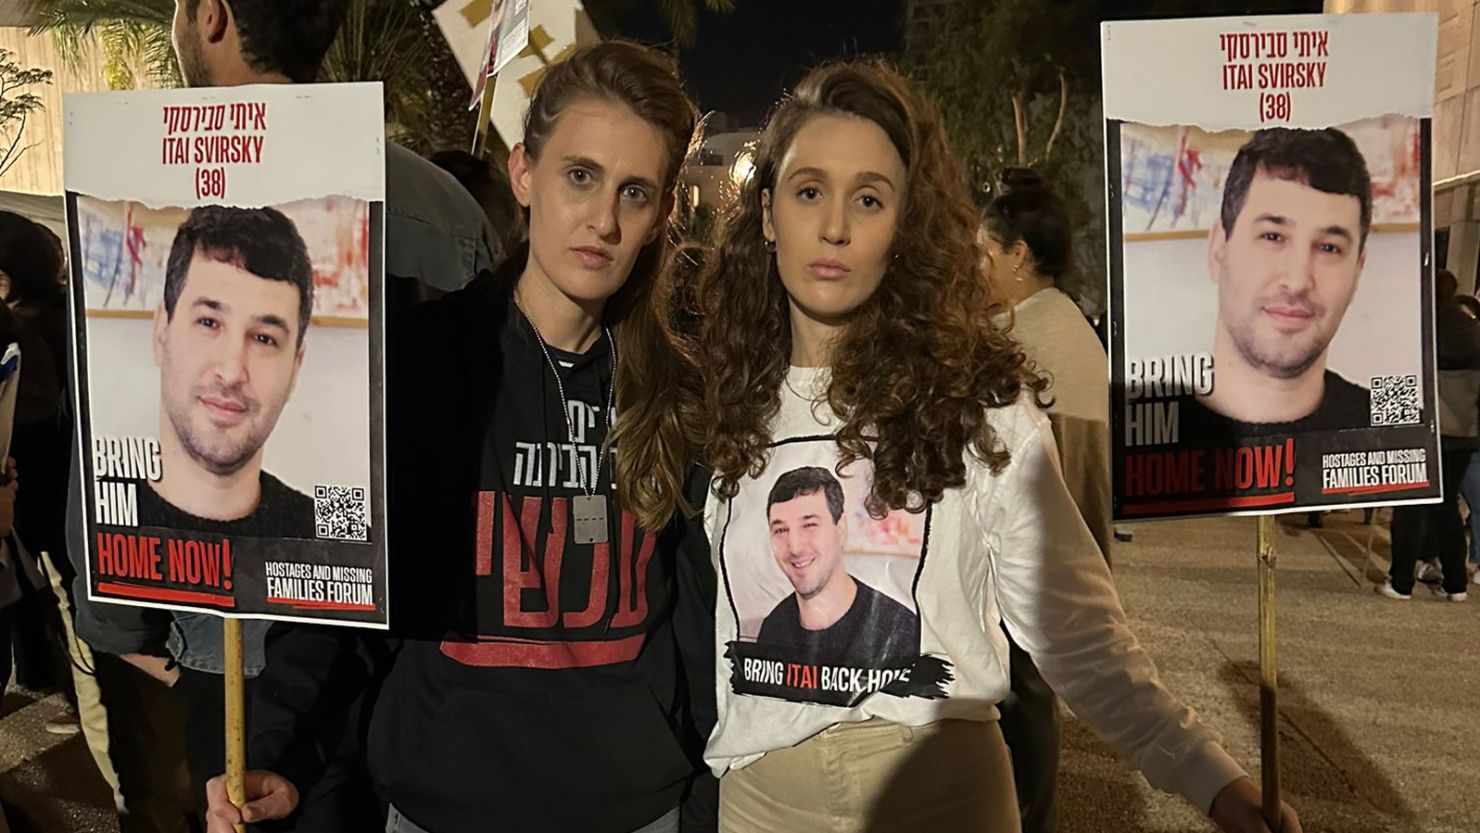 Sisters Dror and Naama Weinberg at Hostages Square in Tel Aviv. They and the rest of the family have been tirelessly campaigning for the release of their cousin Itai Svirsky.